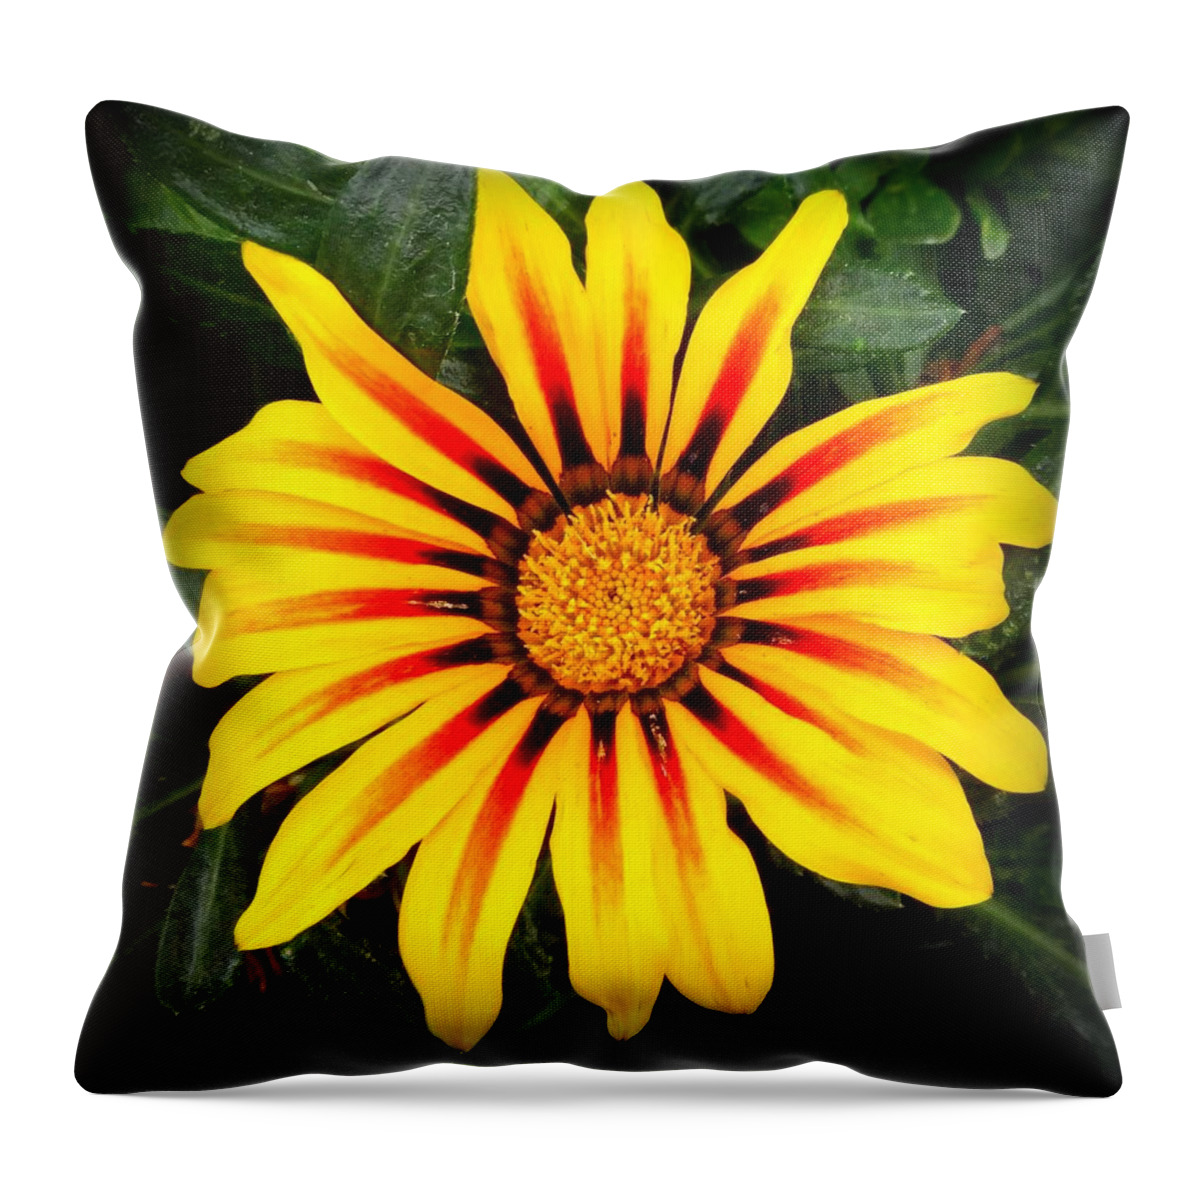 Flower Throw Pillow featuring the photograph Bloom by Donna Spadola